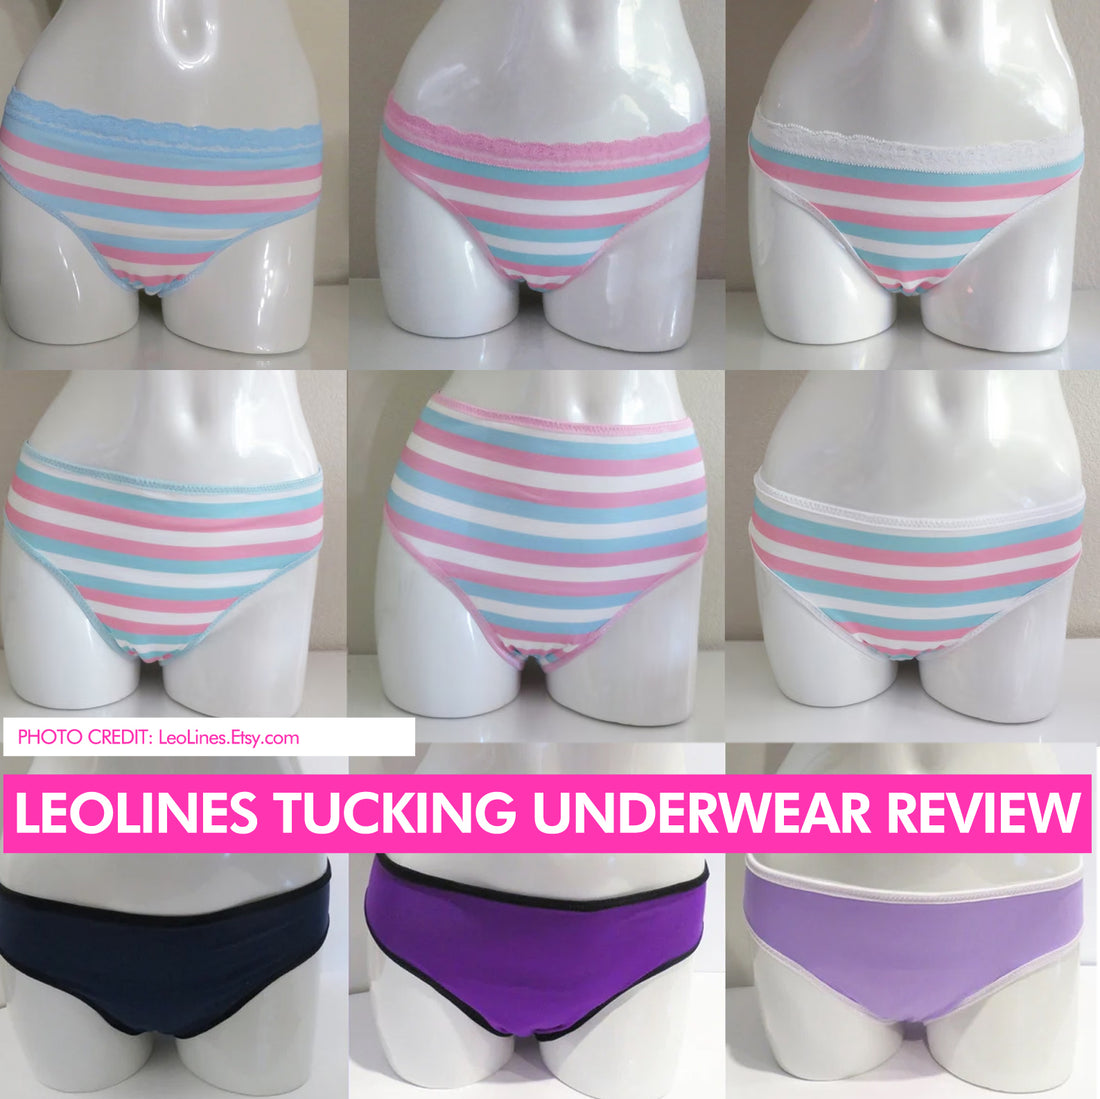 LeoLines Tucking Underwear Review, Are They Worth It?